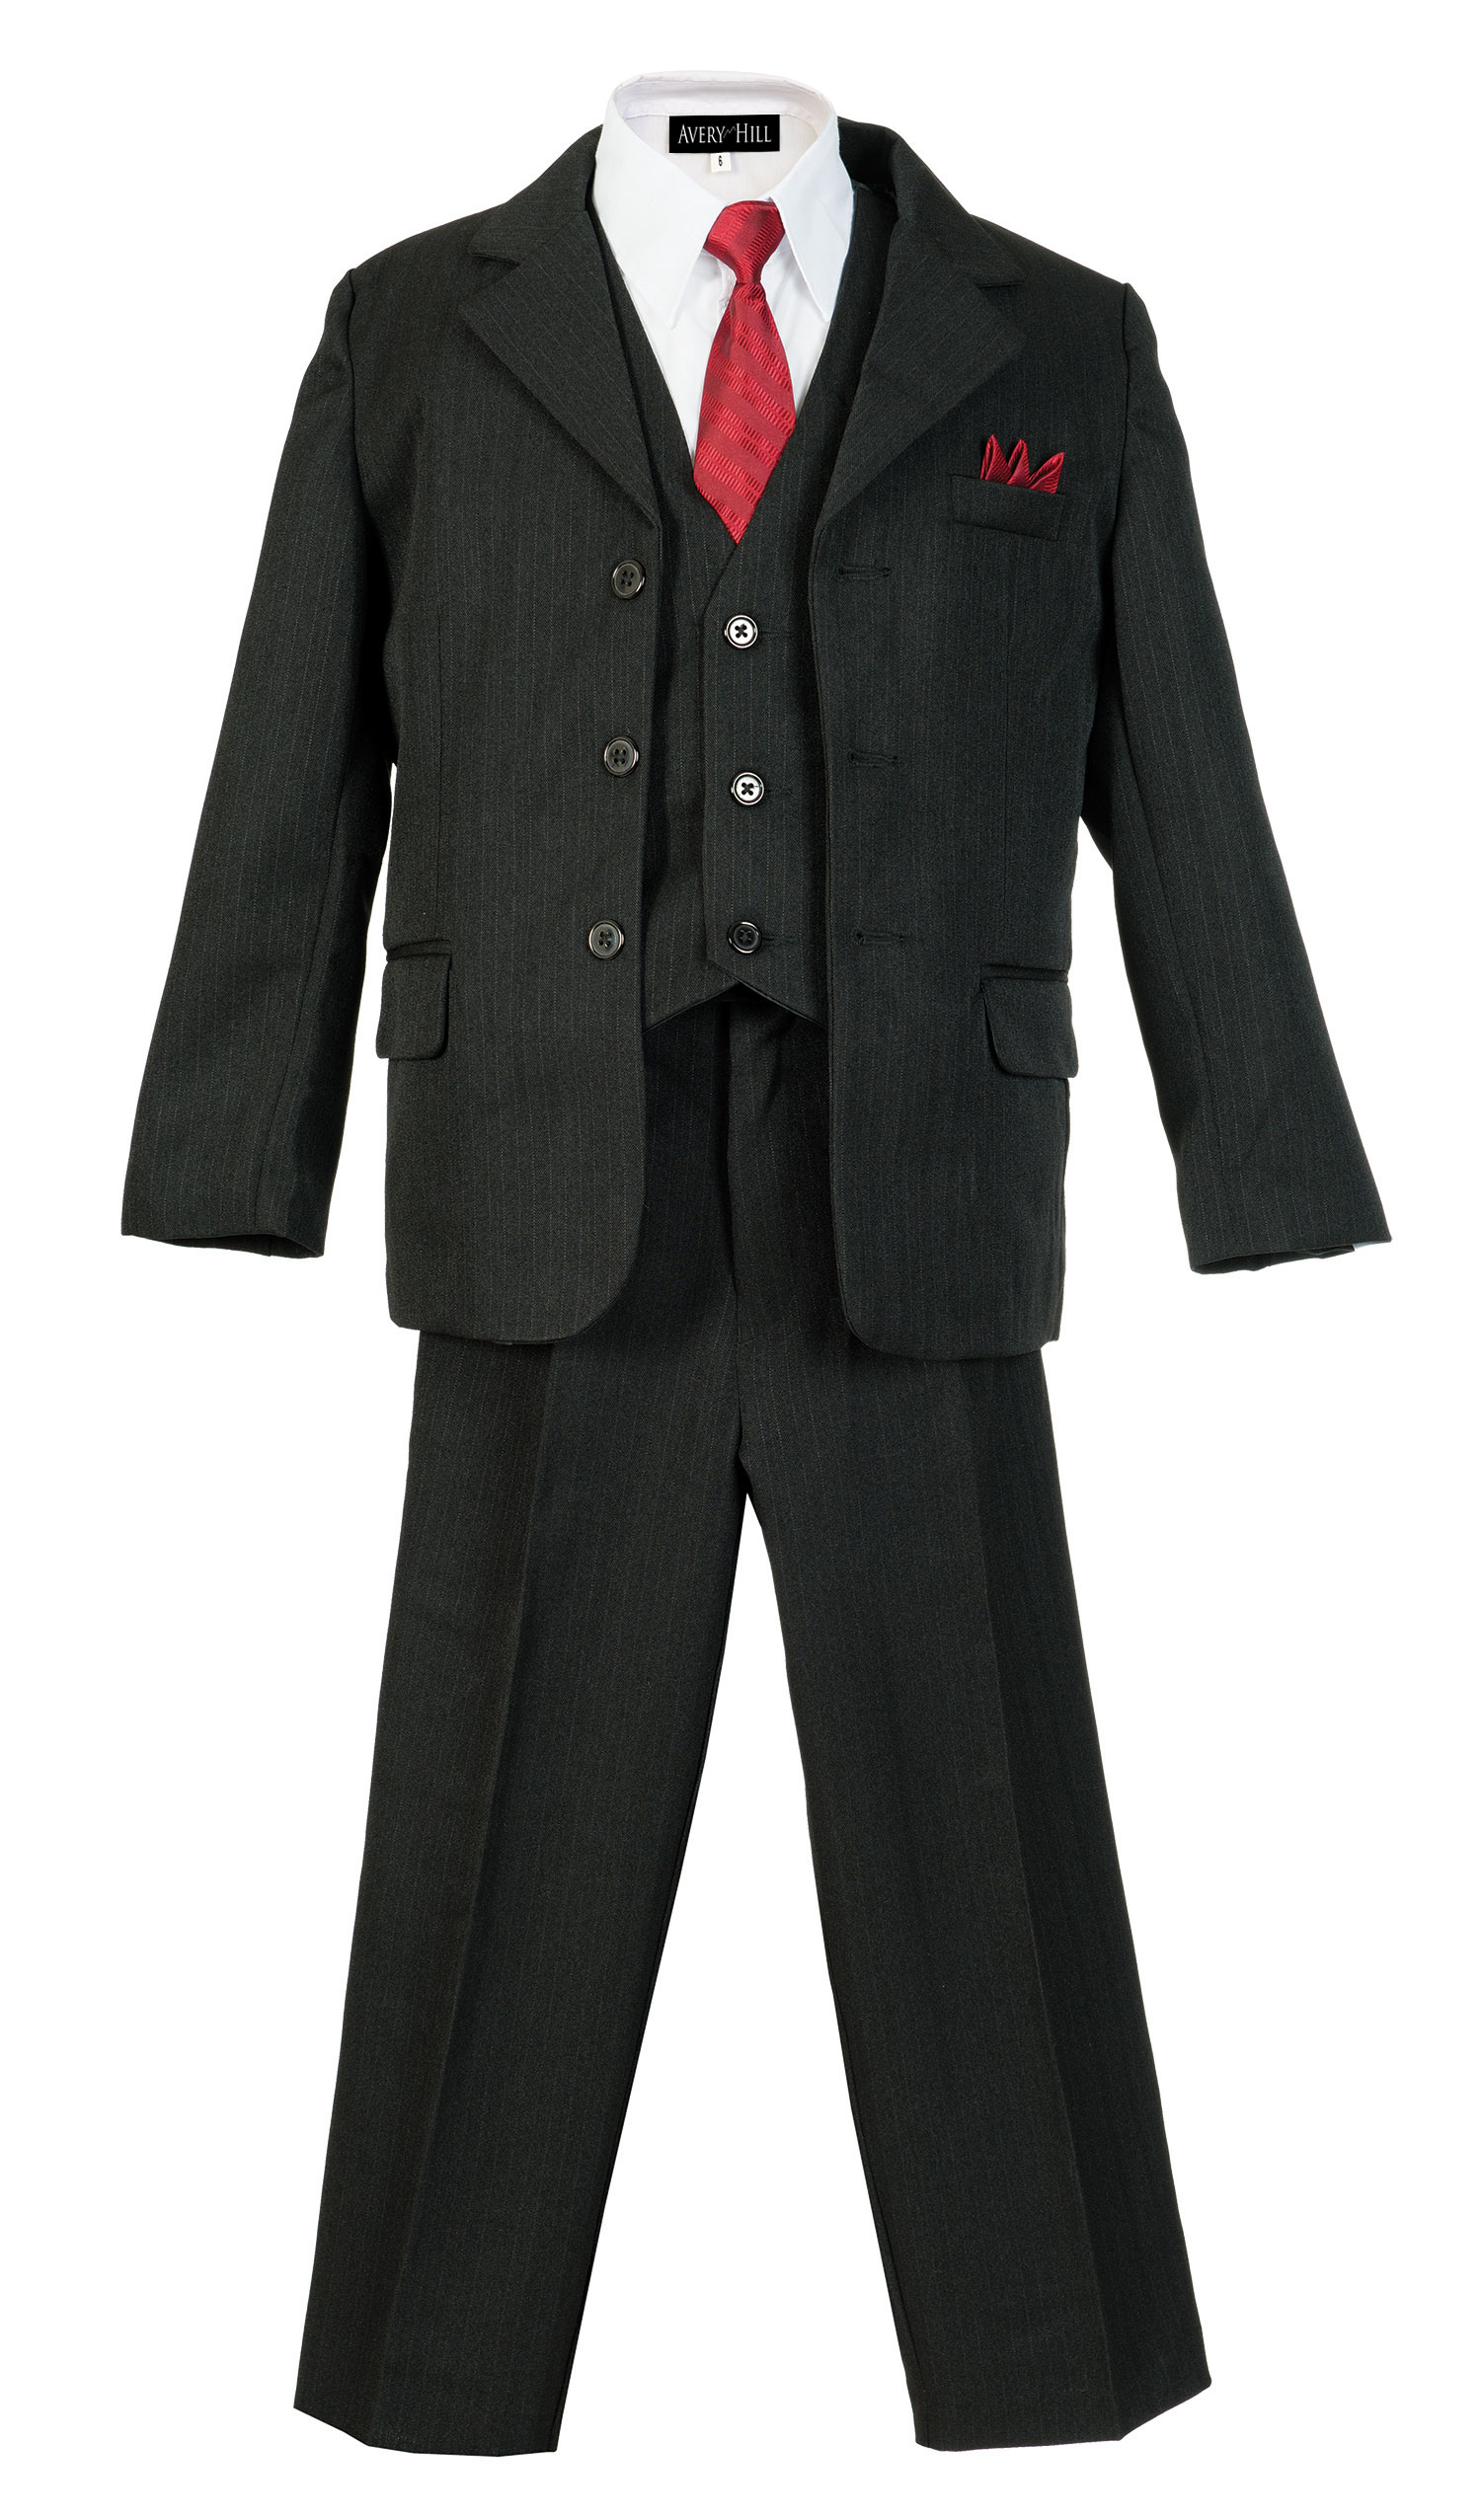 Boys Pinstripe Suit Set with Matching Tie BK 4T